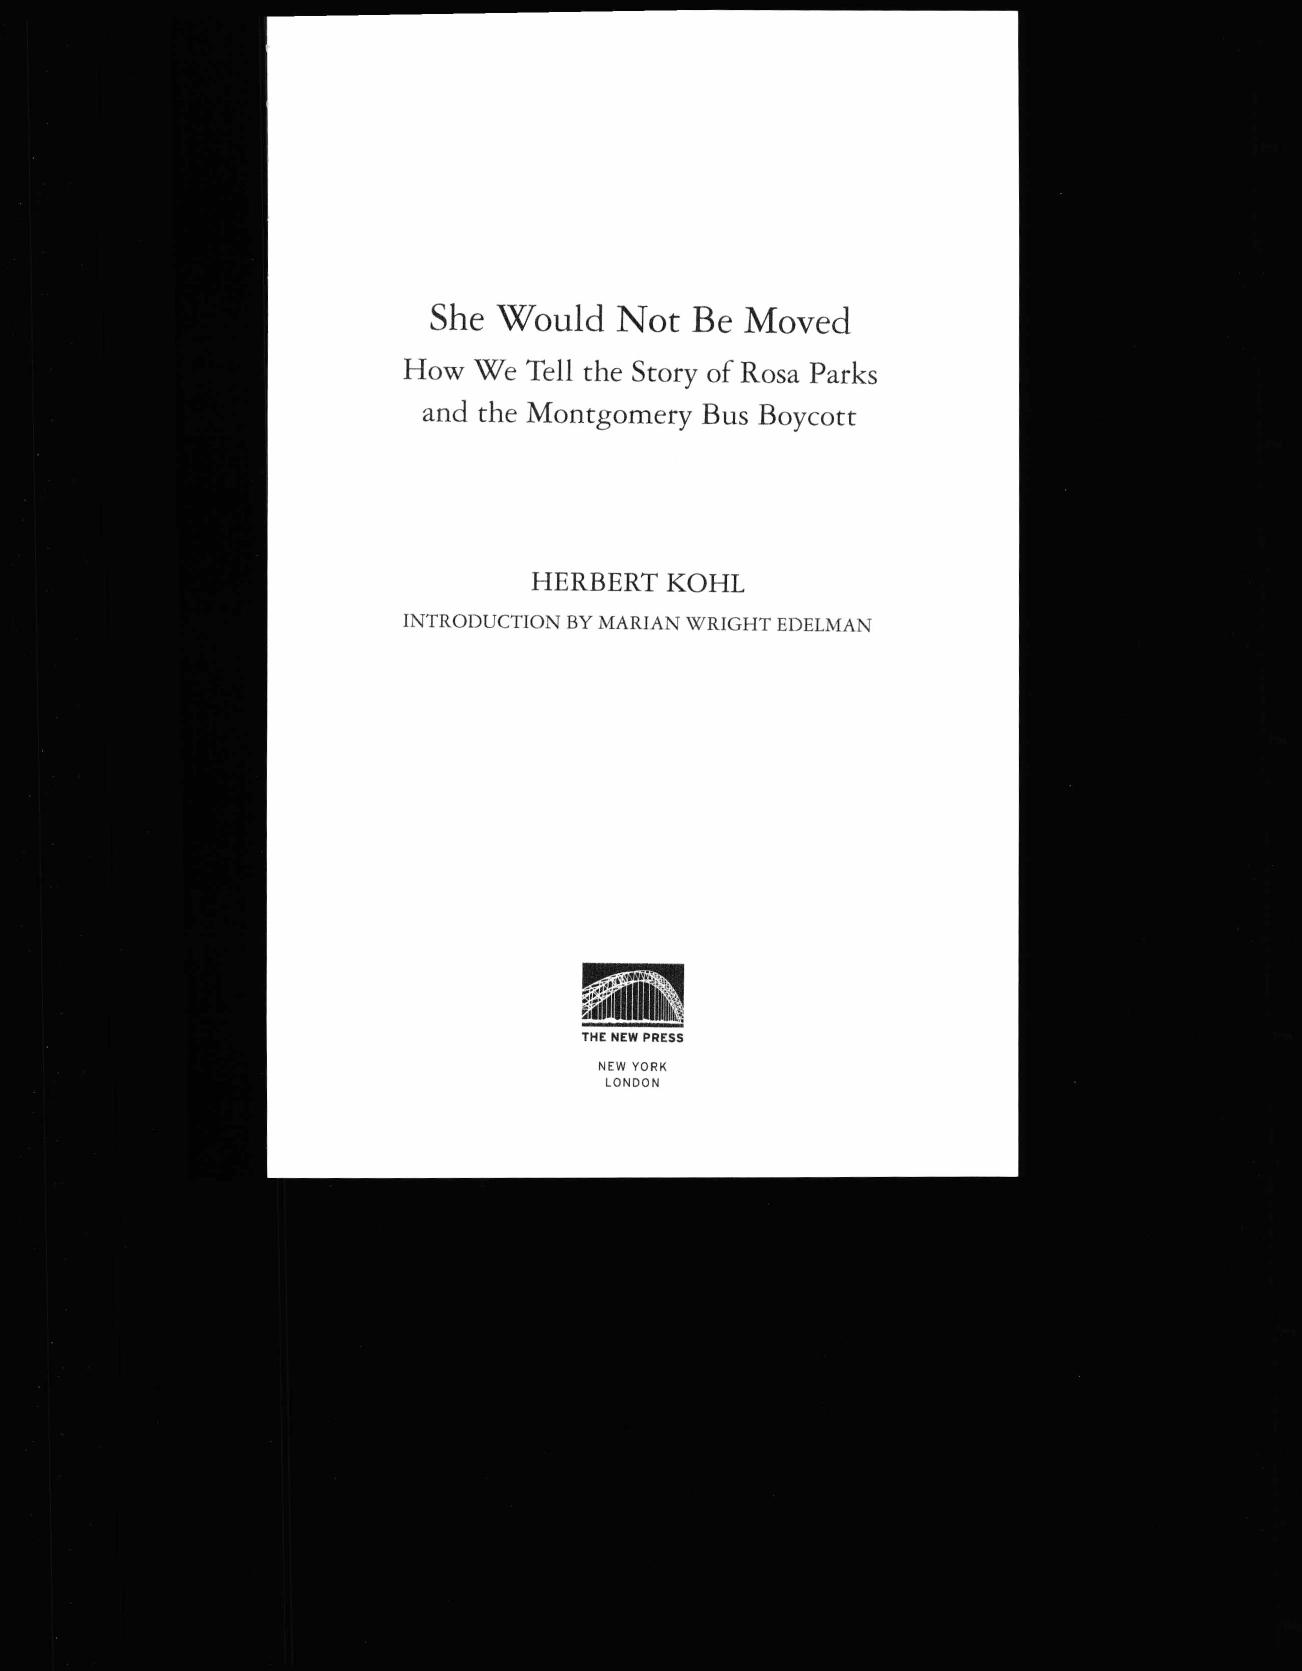 She Would Not Be Moved: How We Tell the Story of Rosa Parks and the Montgomery Bus Boycott by Herbert Kohl